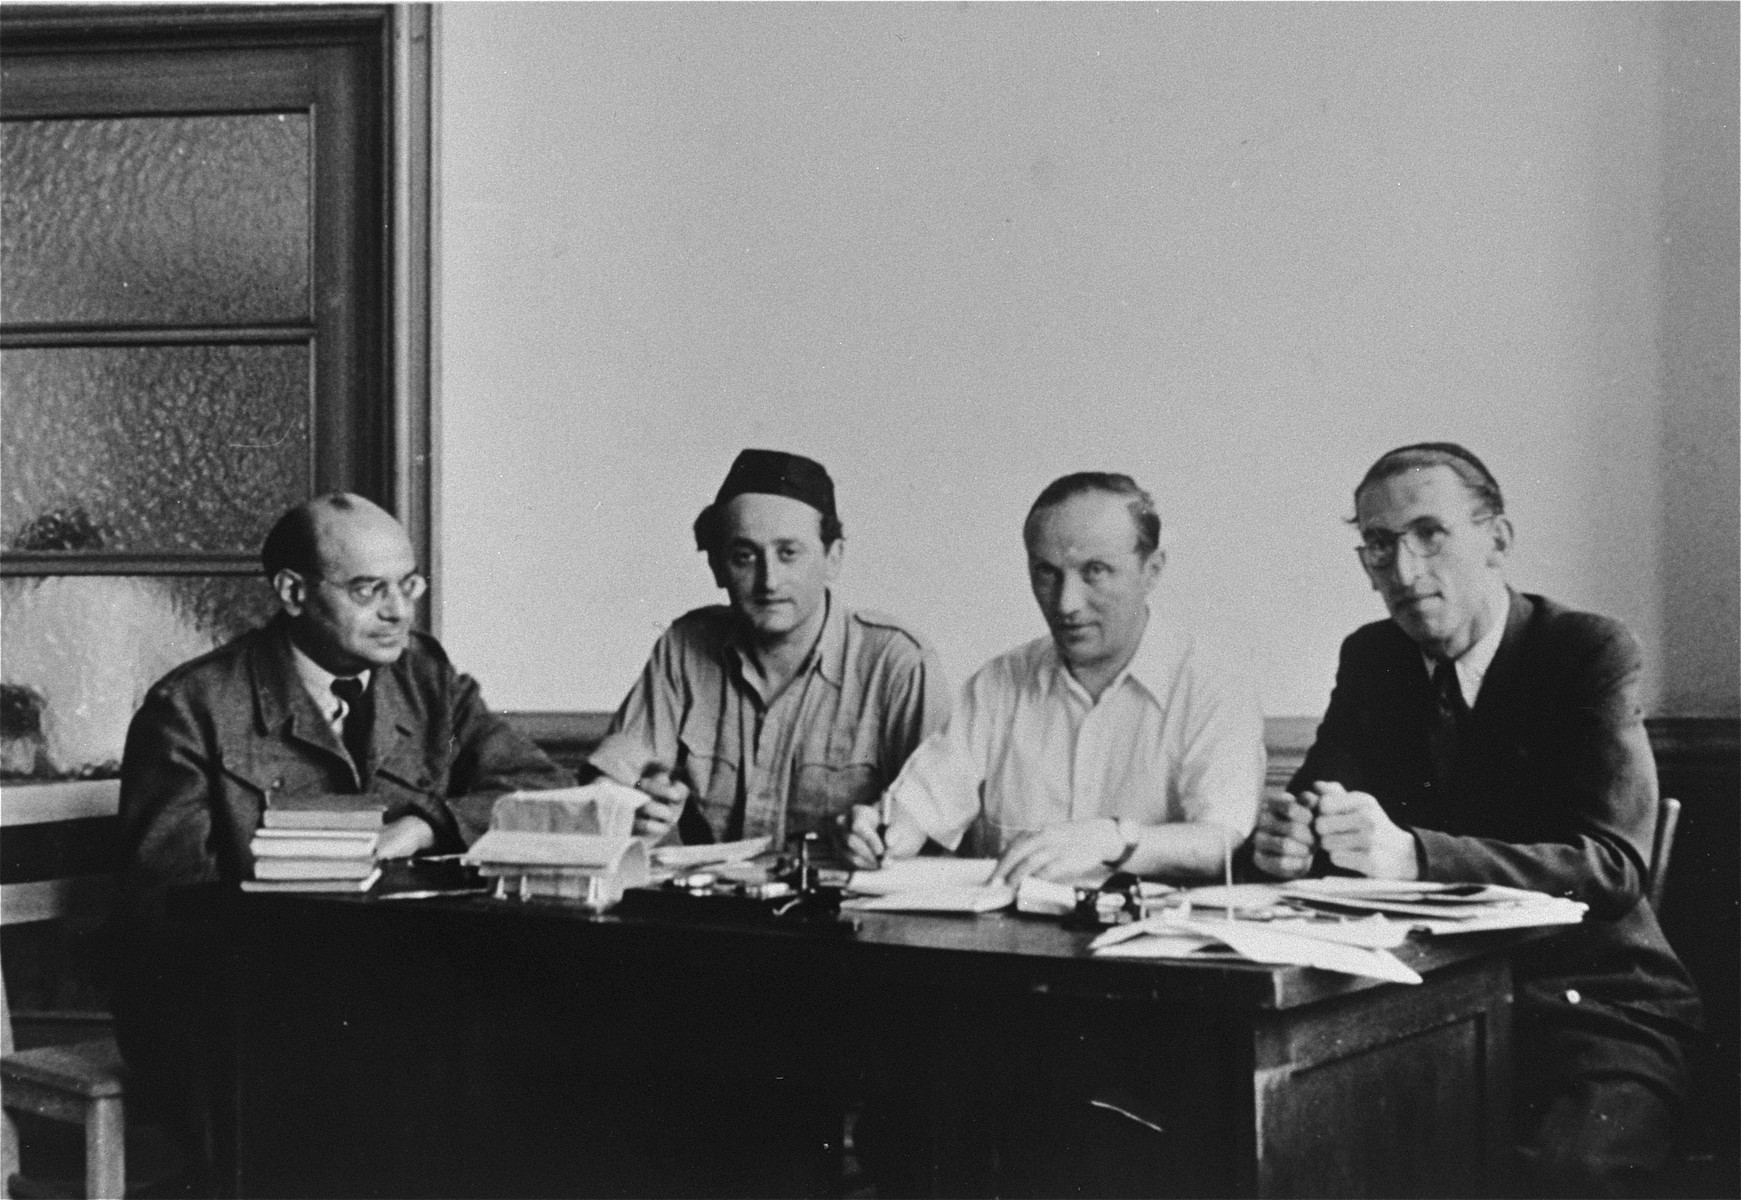 Four members of the Central Jewish Committee for the British Zone of Germany are seated in an office.

Pictured from left to right are: unknown; Rabbi Zvi Helfgott (later Zvi Asaria); Josef Rosensaft; and Rabbi Joseph Asher.